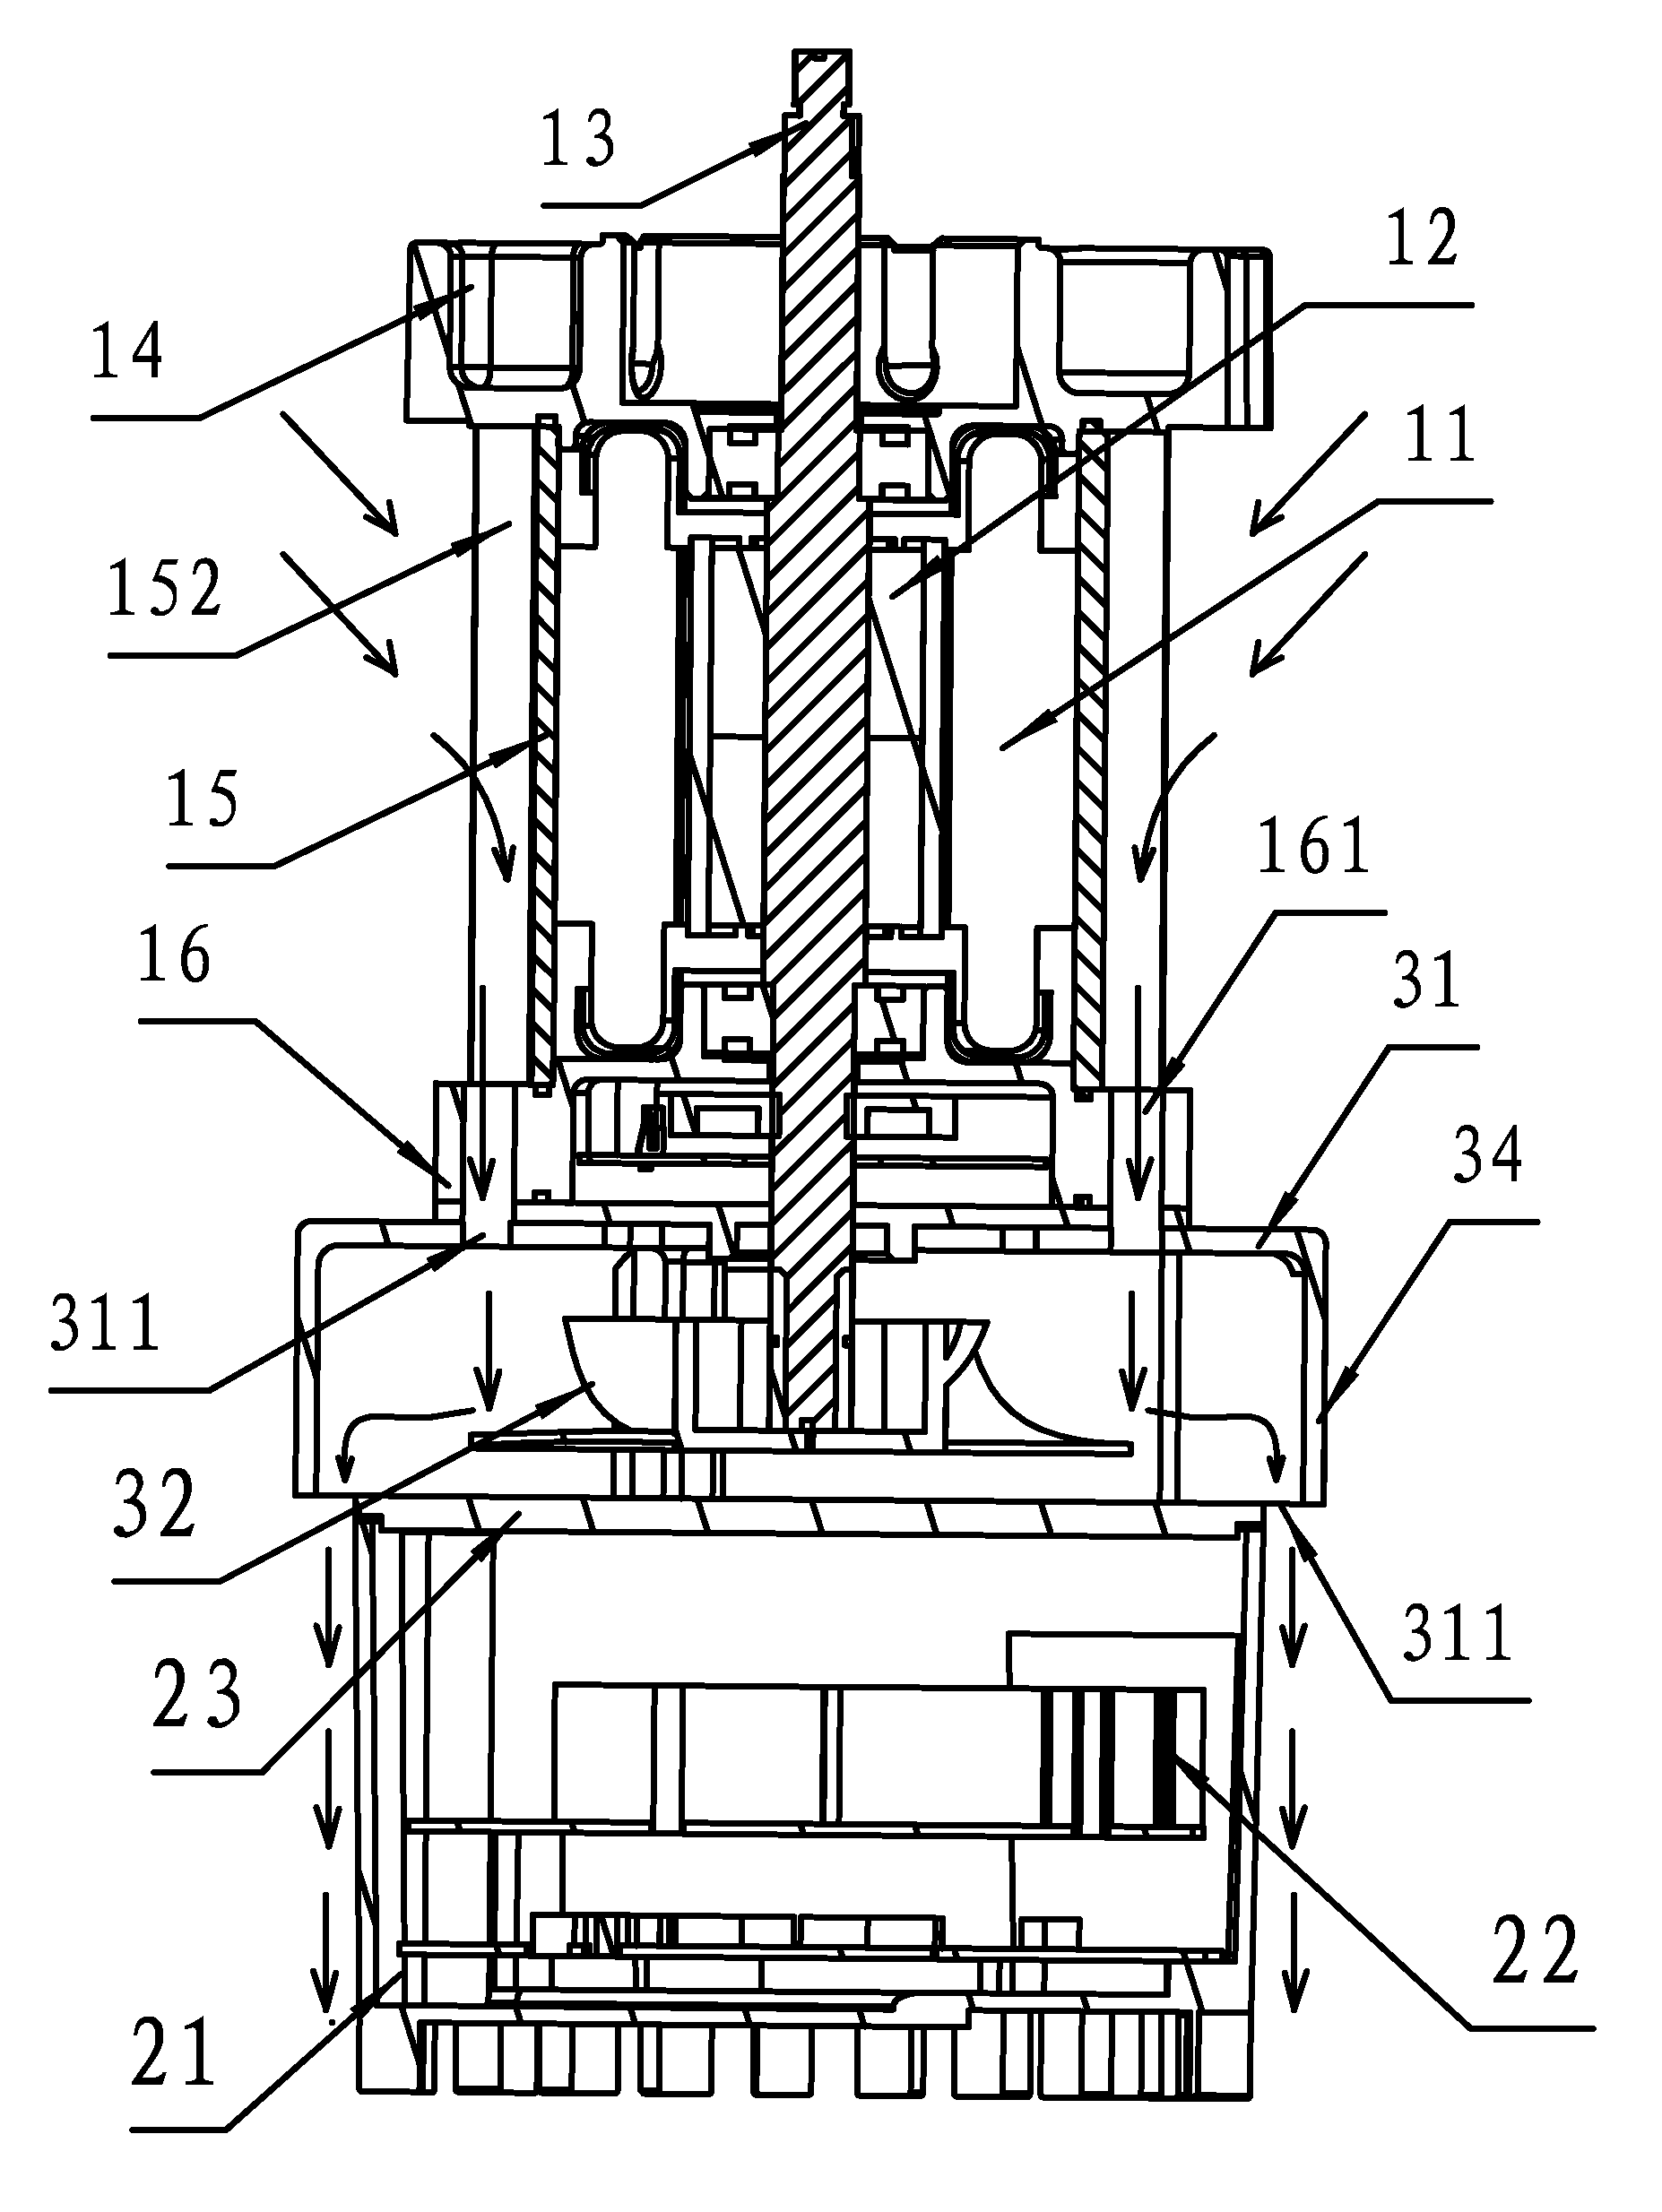 Brushless DC motor structure having a fan radiator for dissipating heat from the motor and the controller